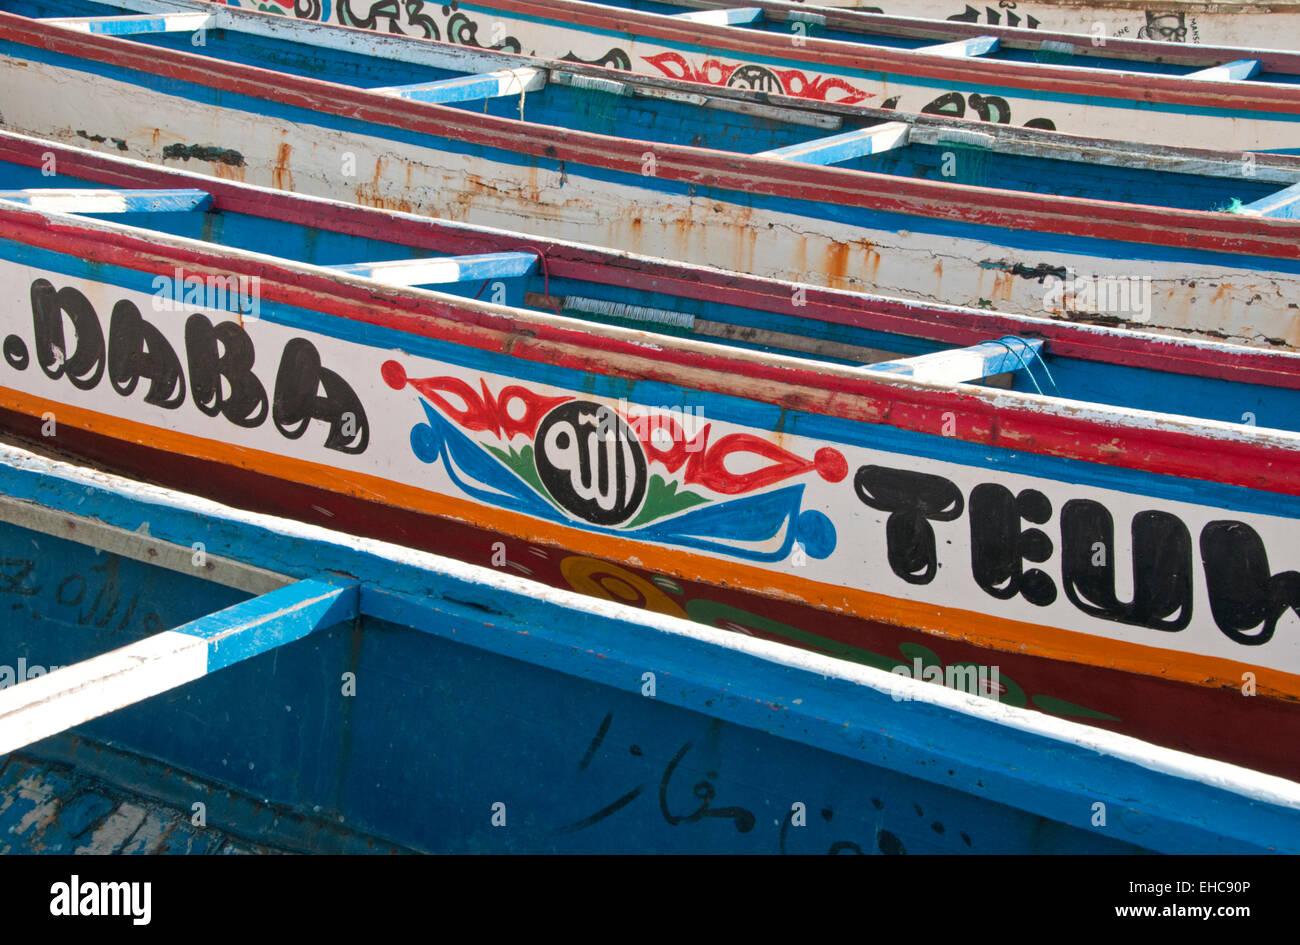 Colourful Fishing Boat Cameo, Tanji Fishing Village, The Gambia, West Africa Stock Photo